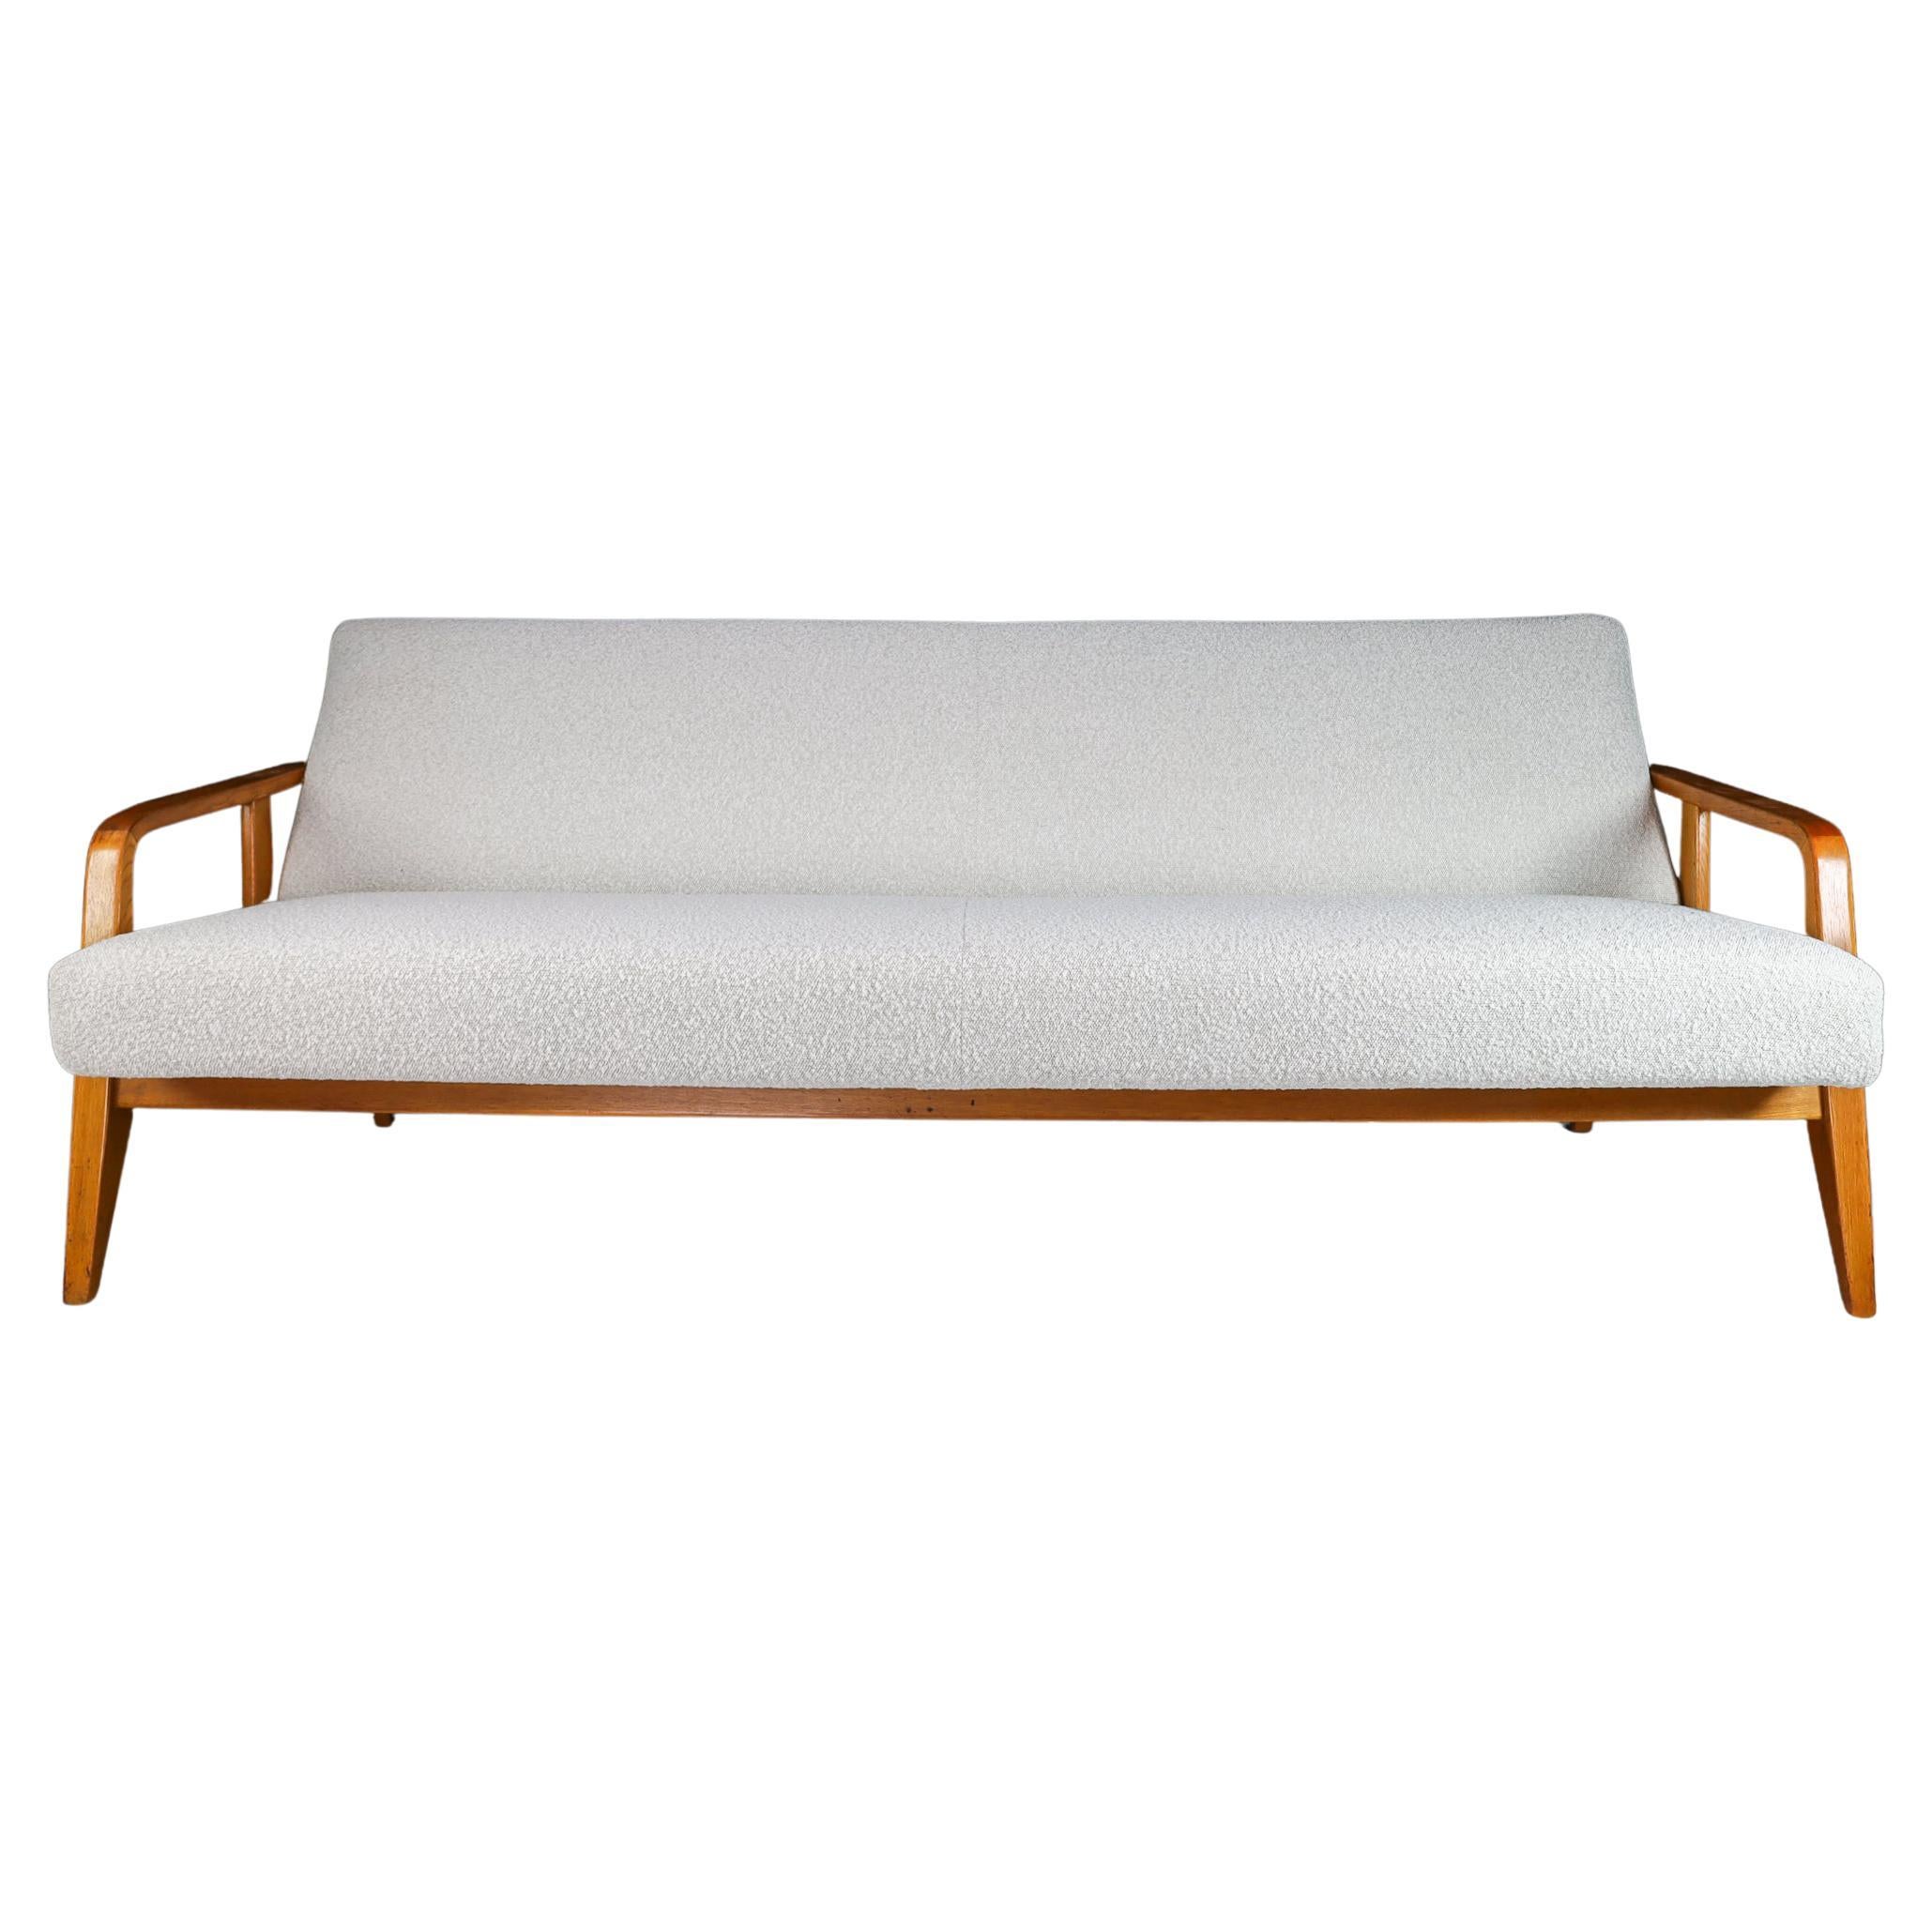 Mid-Century Modern Oak Sofa /Daybed in New Boucle Upholstery Wool, France, 1950s